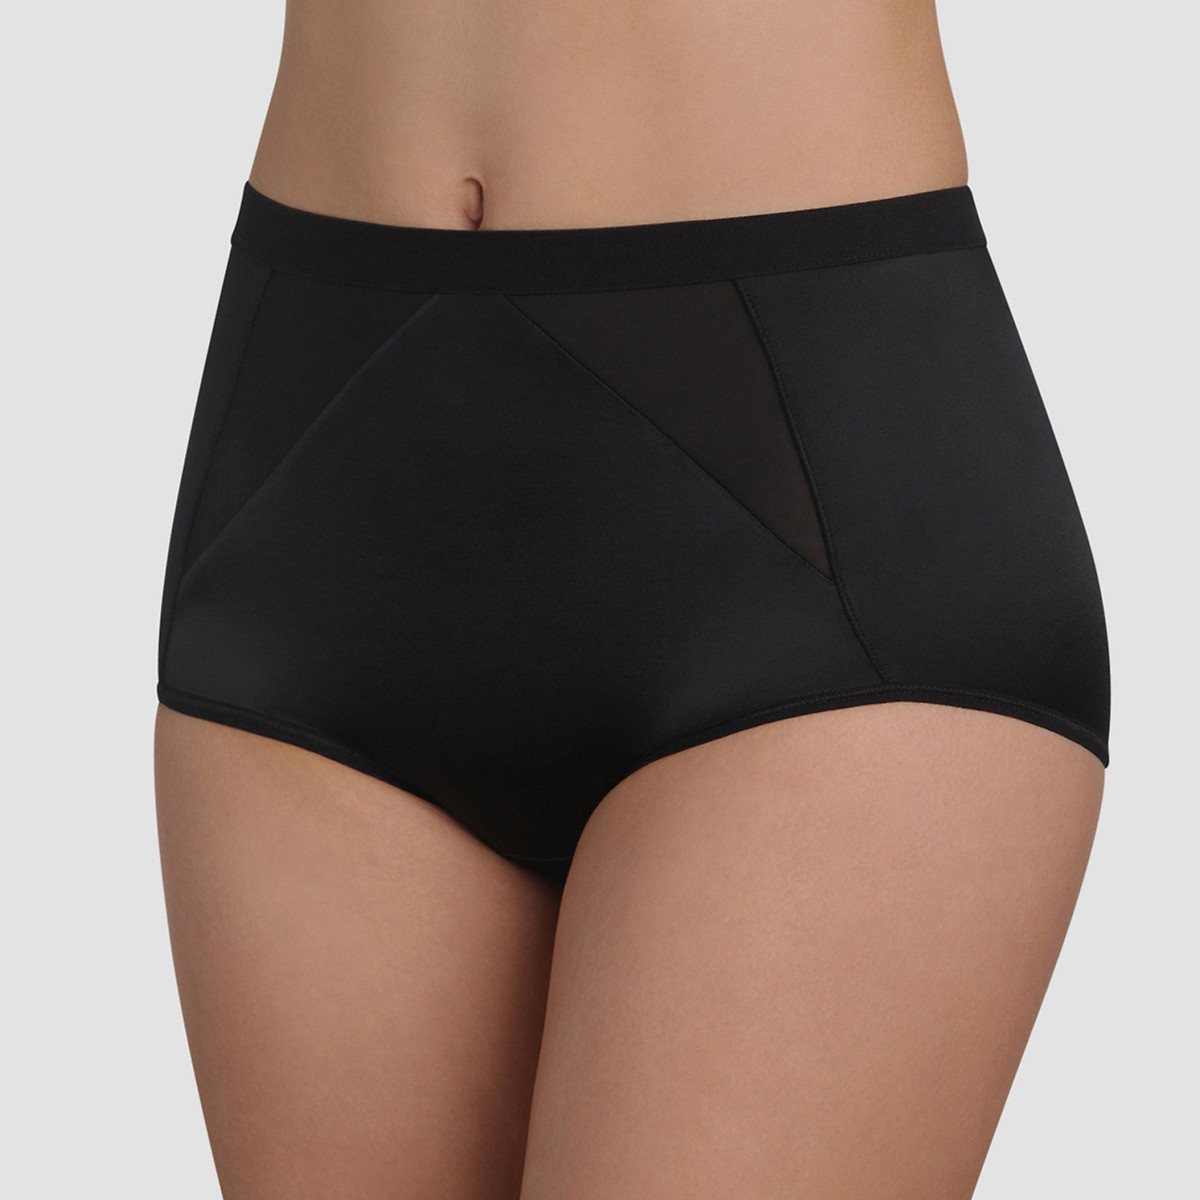 Perfect silhouette maxi knickers Playtex